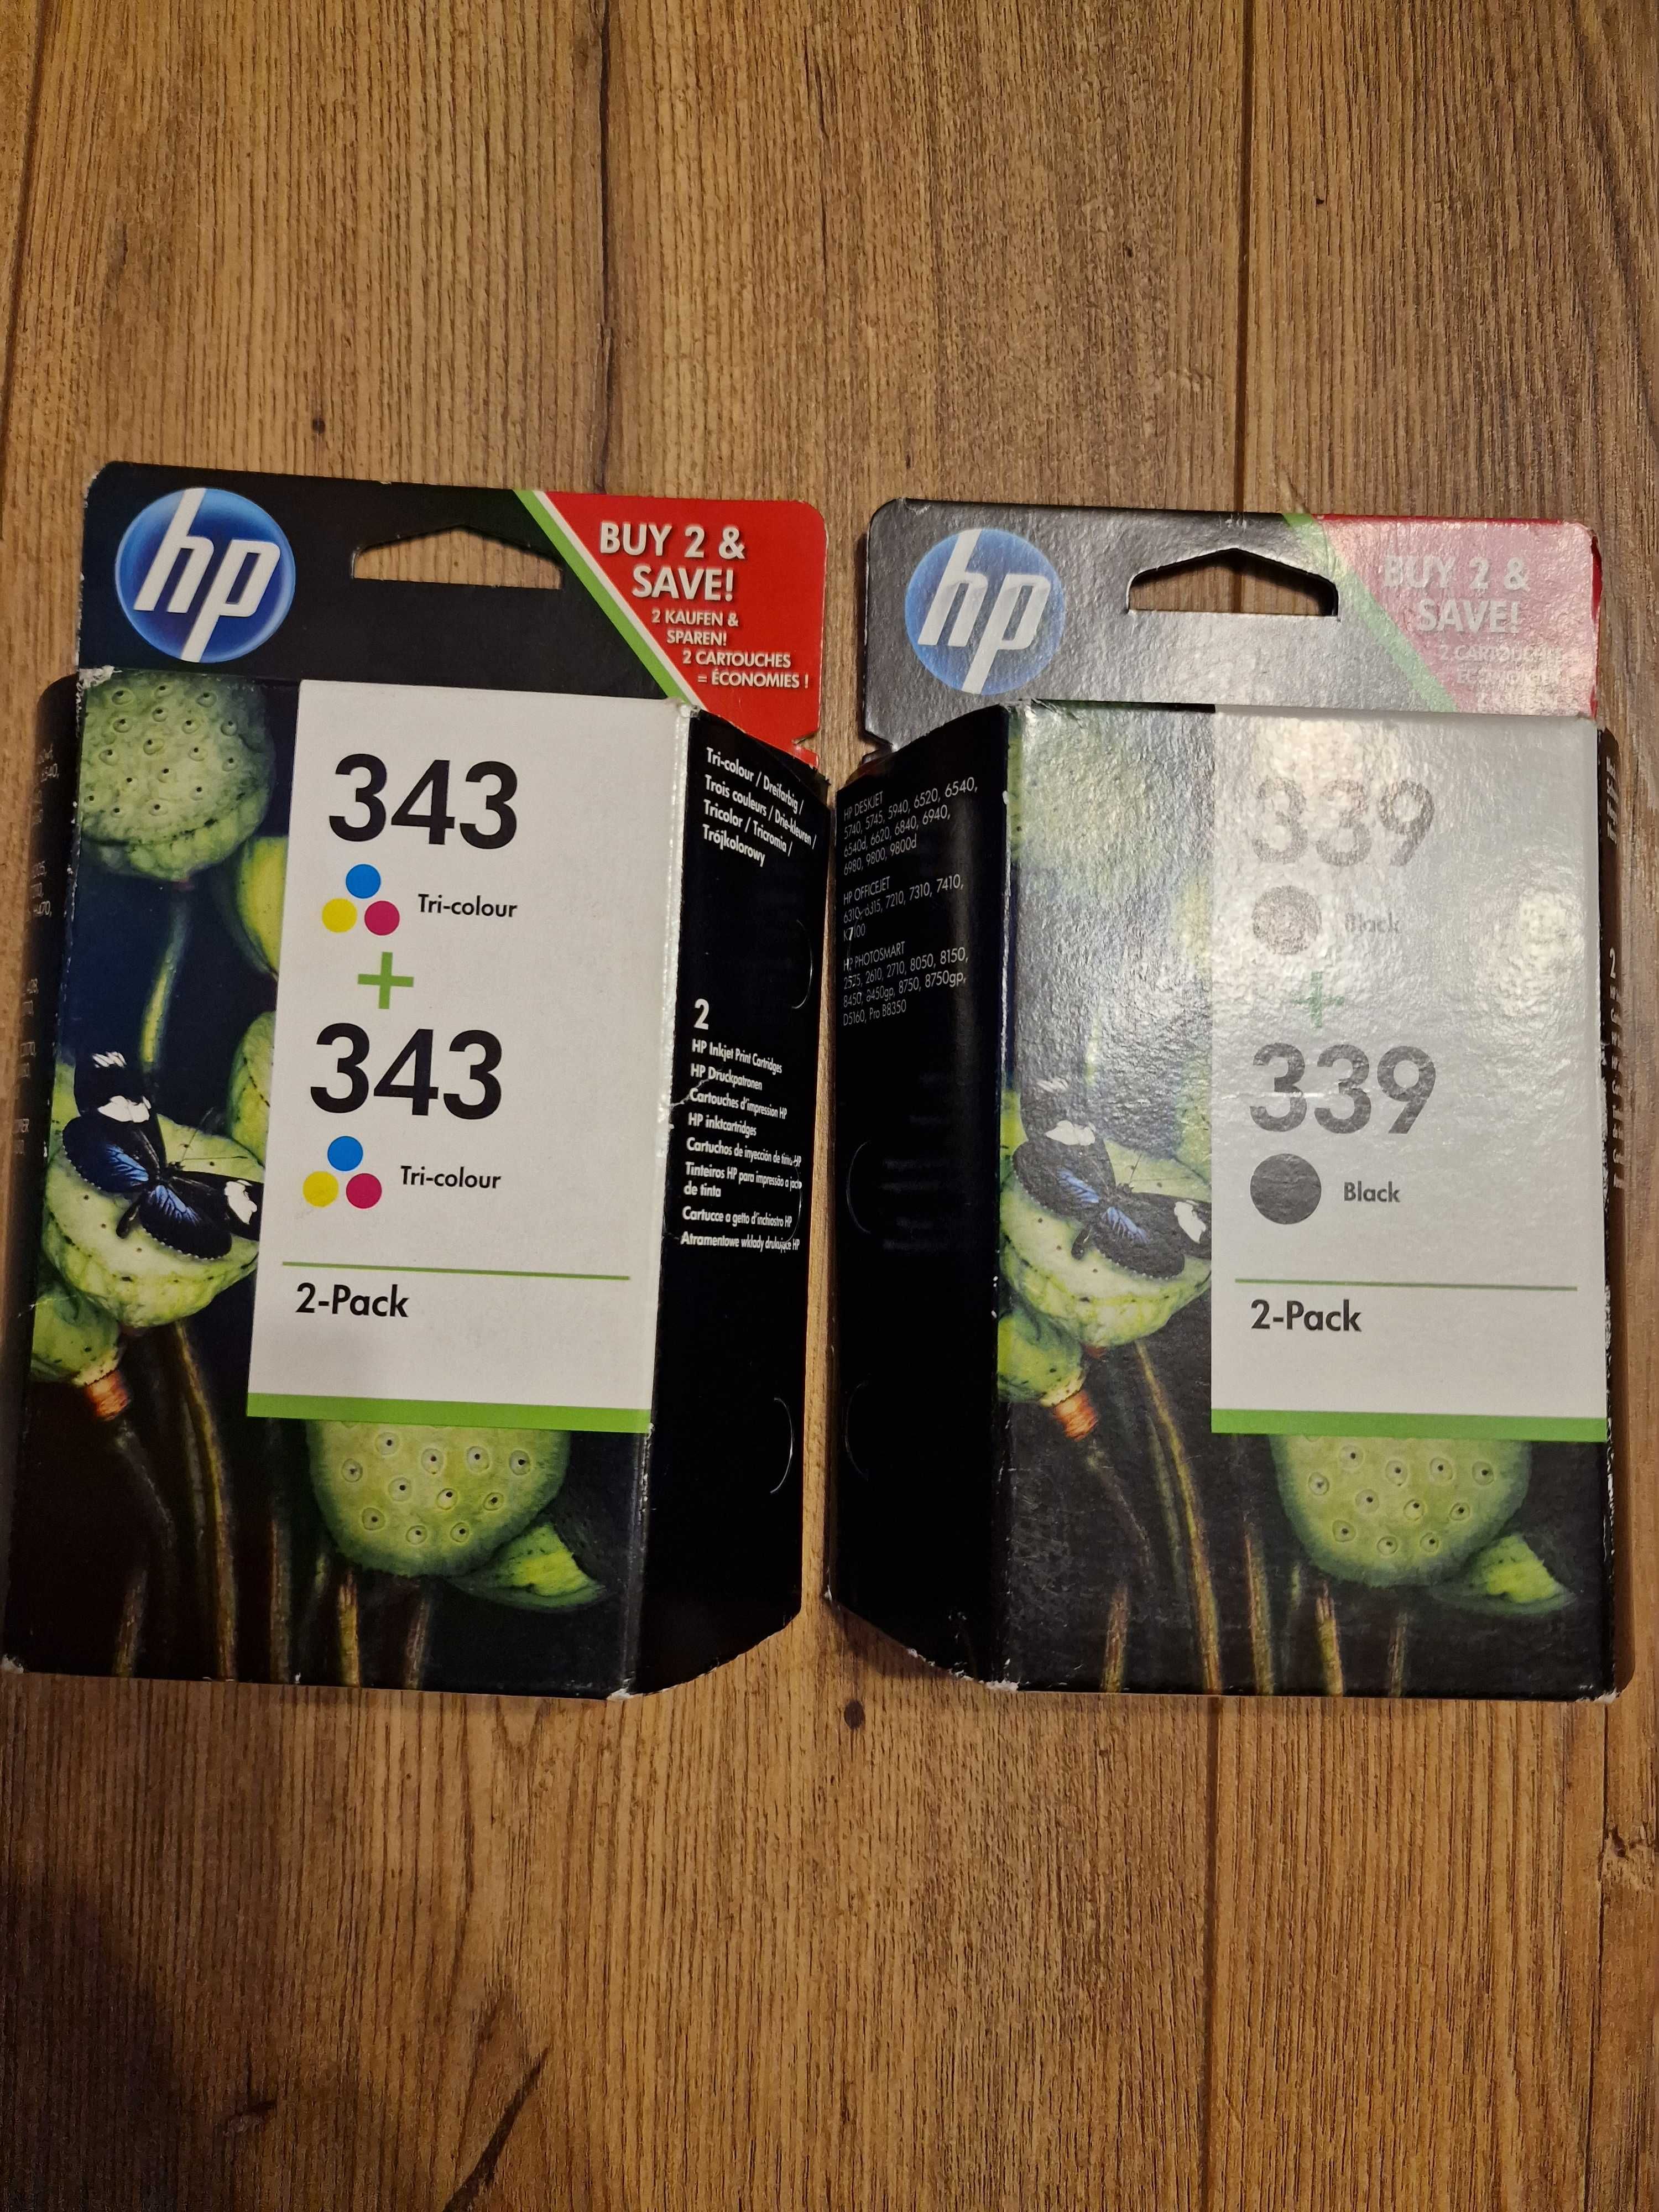 TUSZE HP 339 2pack HP 343